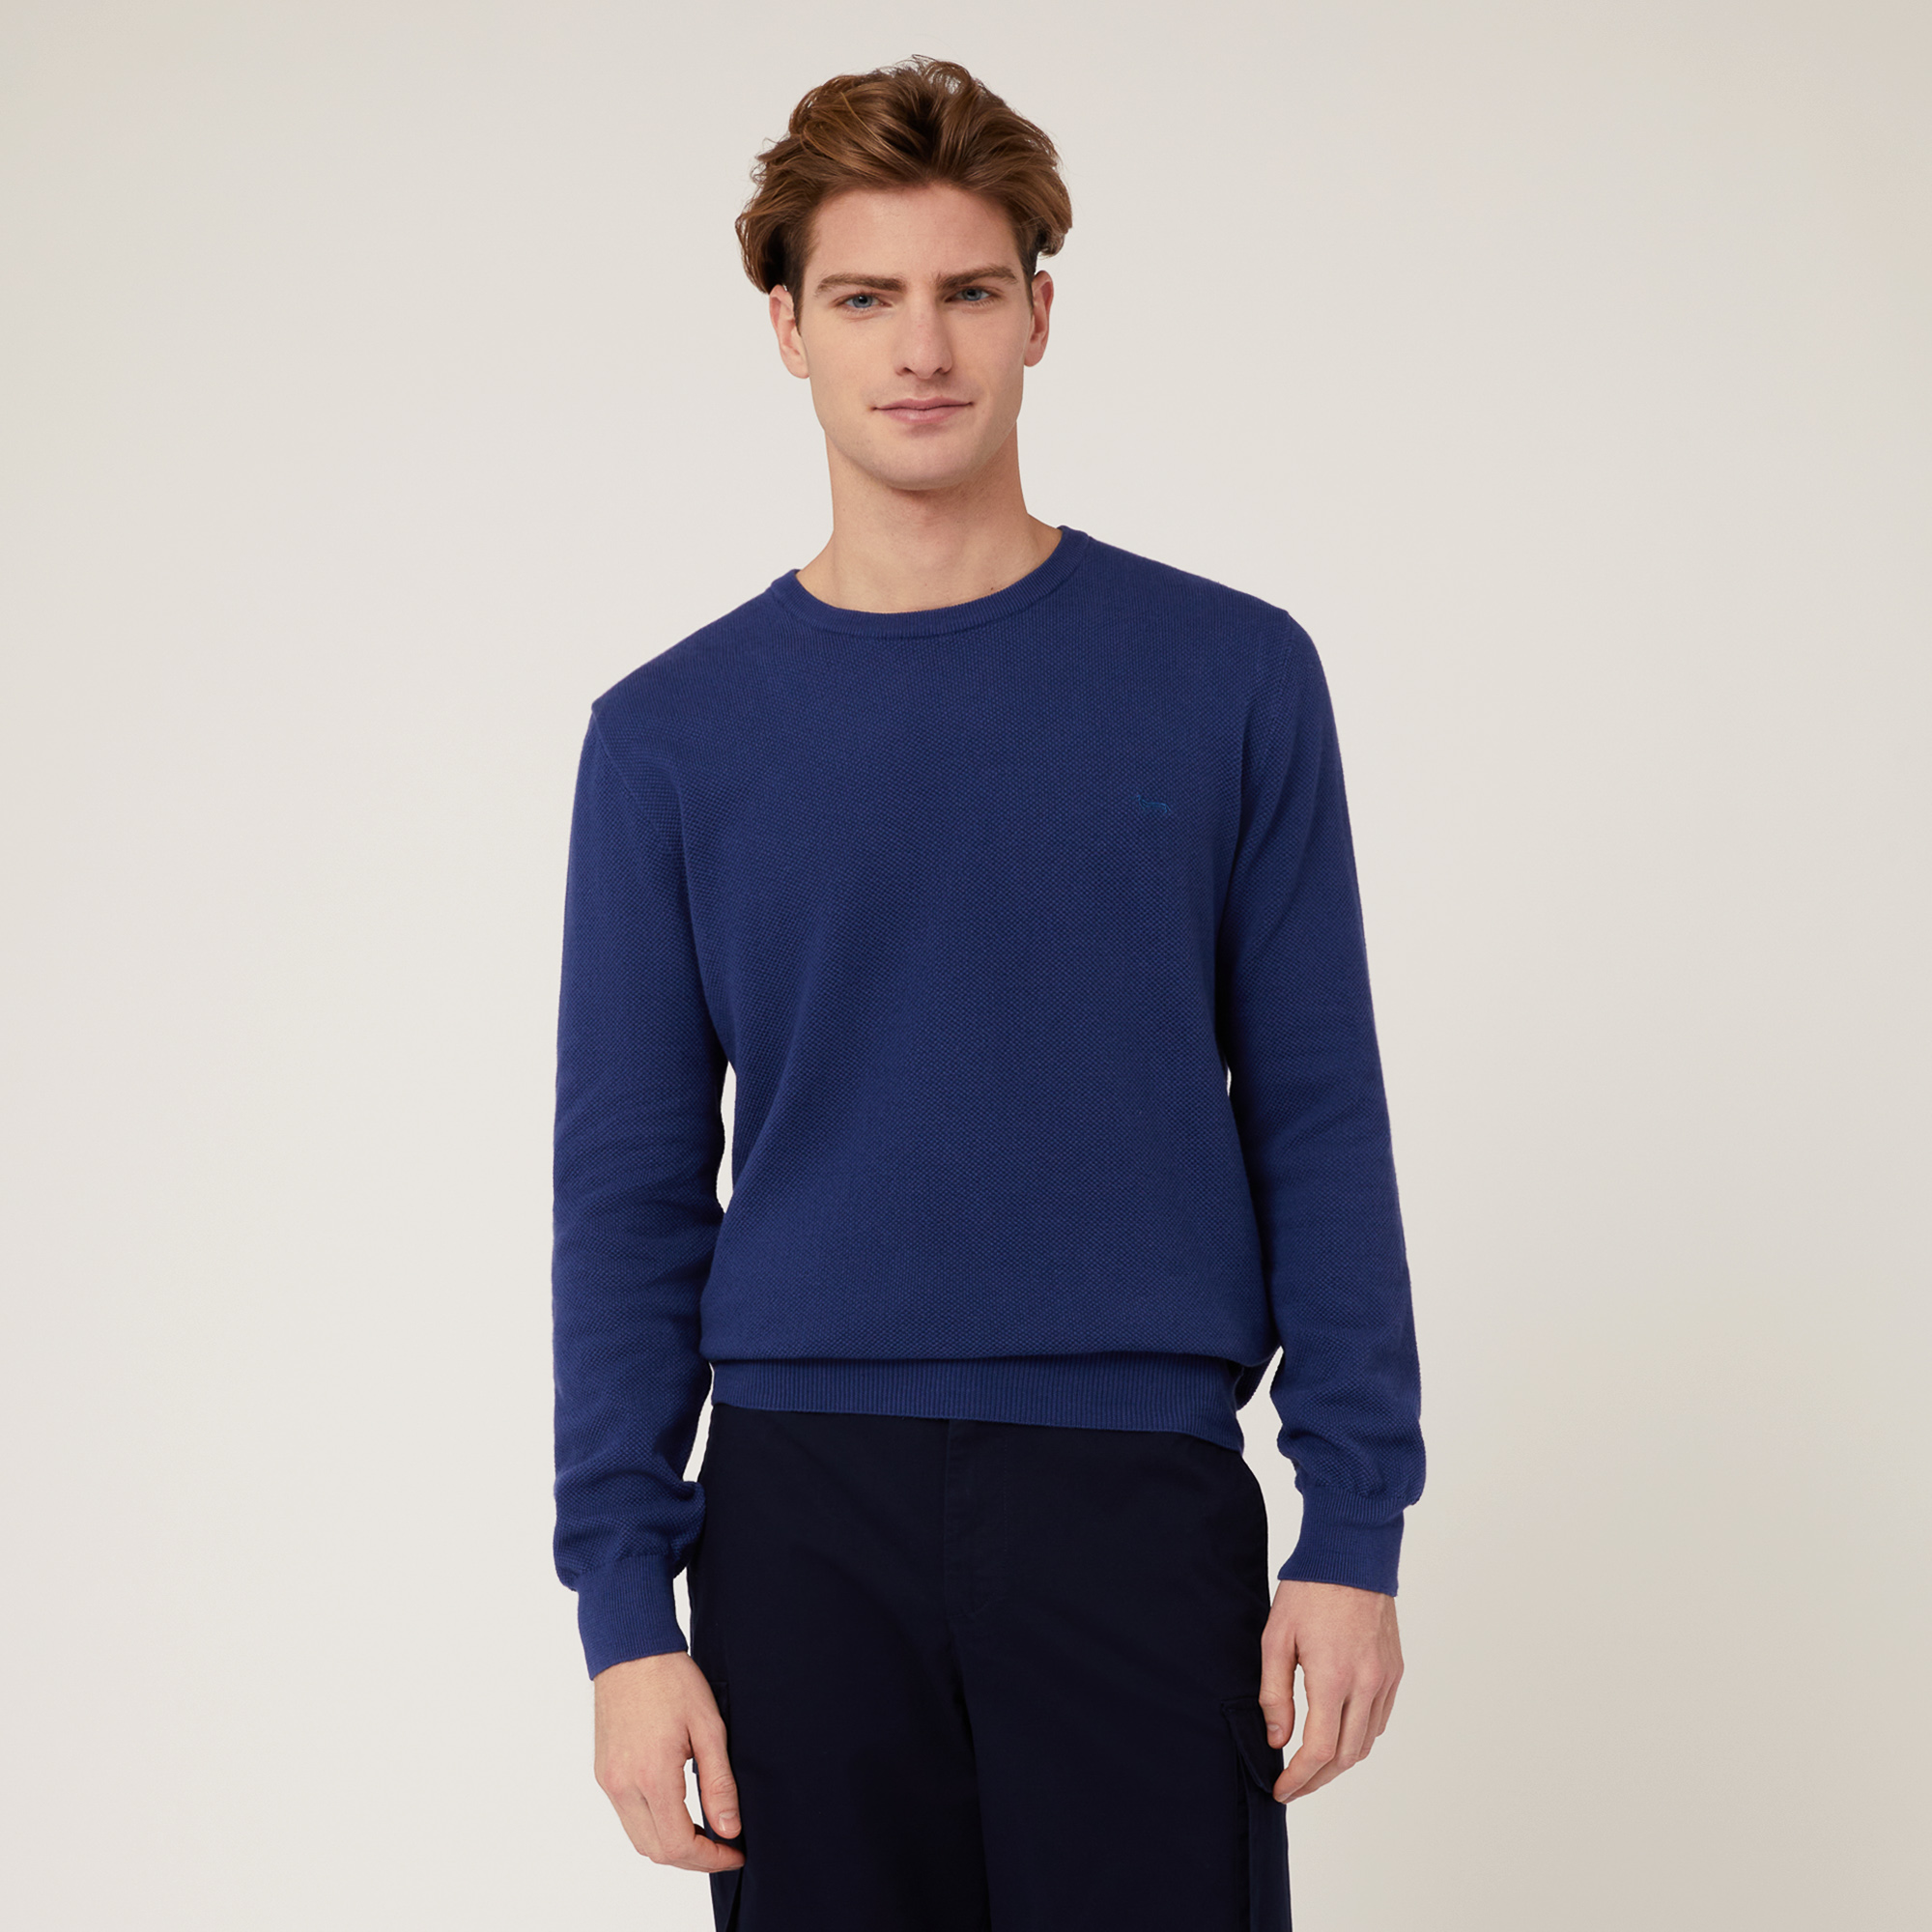 Pullover Girocollo Effetto 3D, Blu, large image number 0